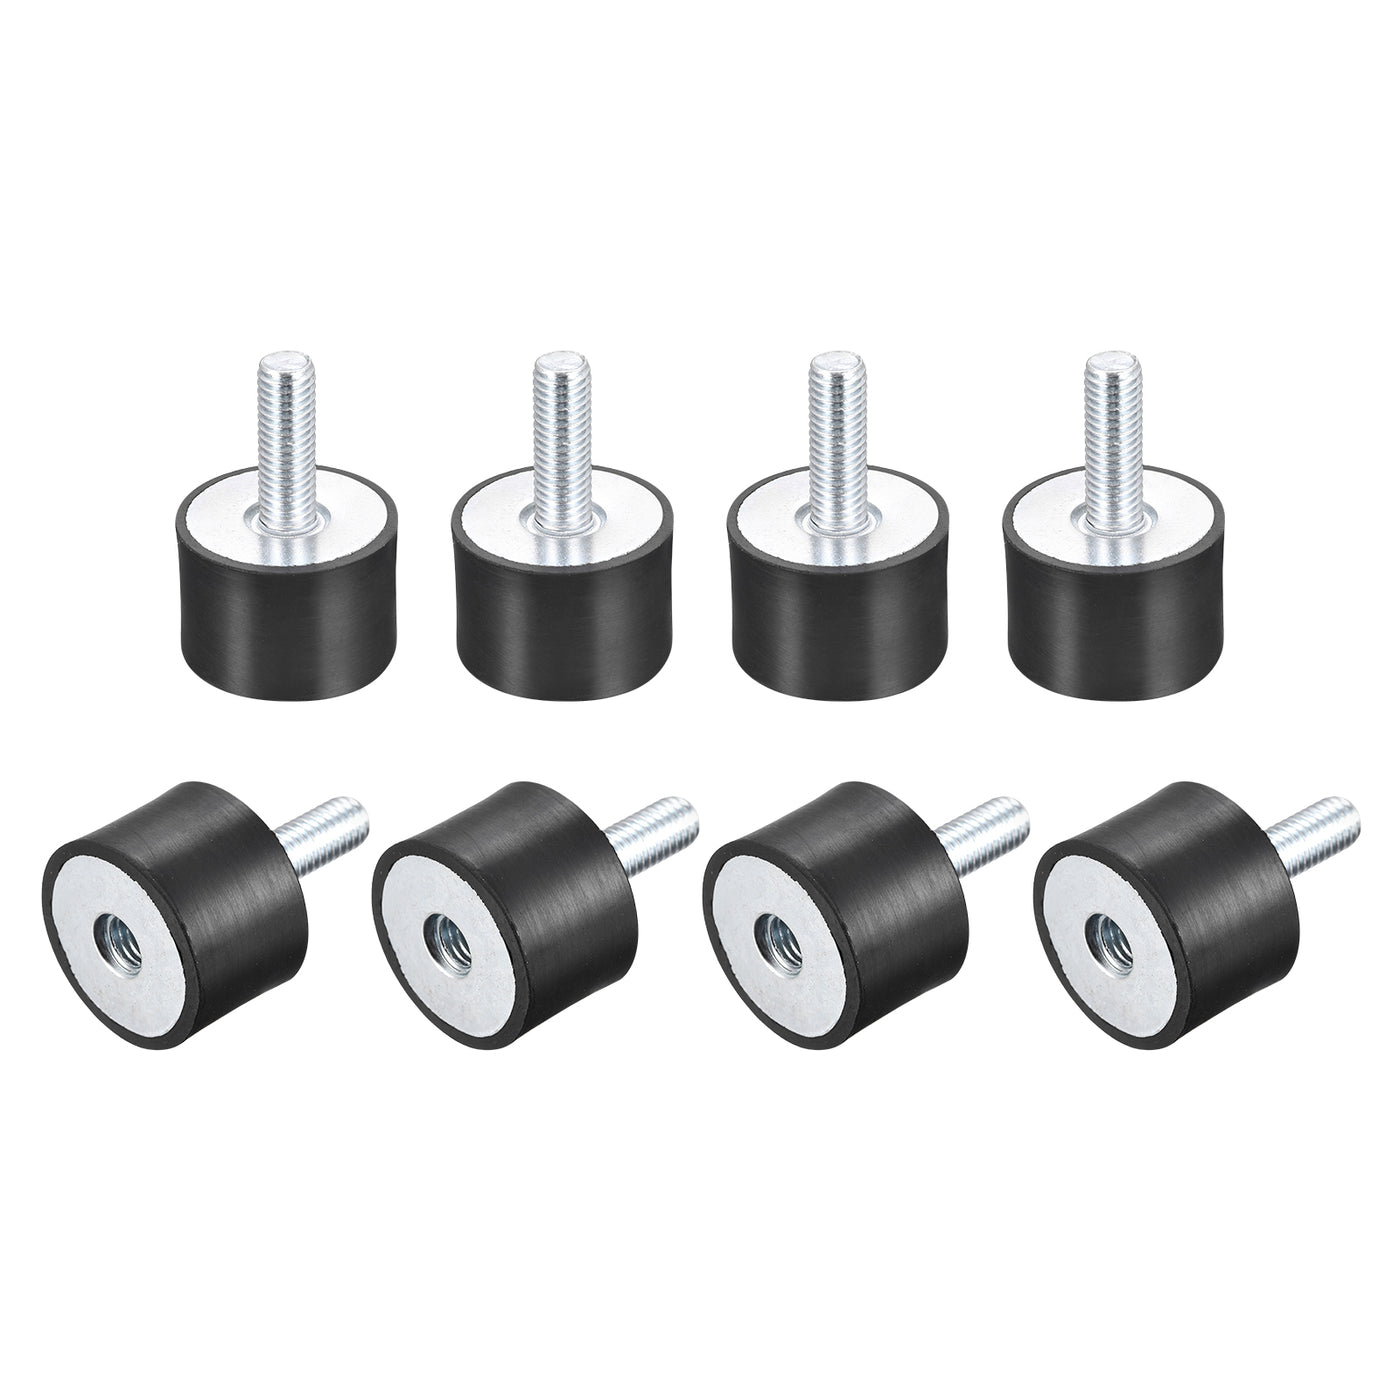 uxcell Uxcell Rubber Mount 8pcs M8 Male/Female Vibration Isolator Shock Absorber, D30mmxH20mm